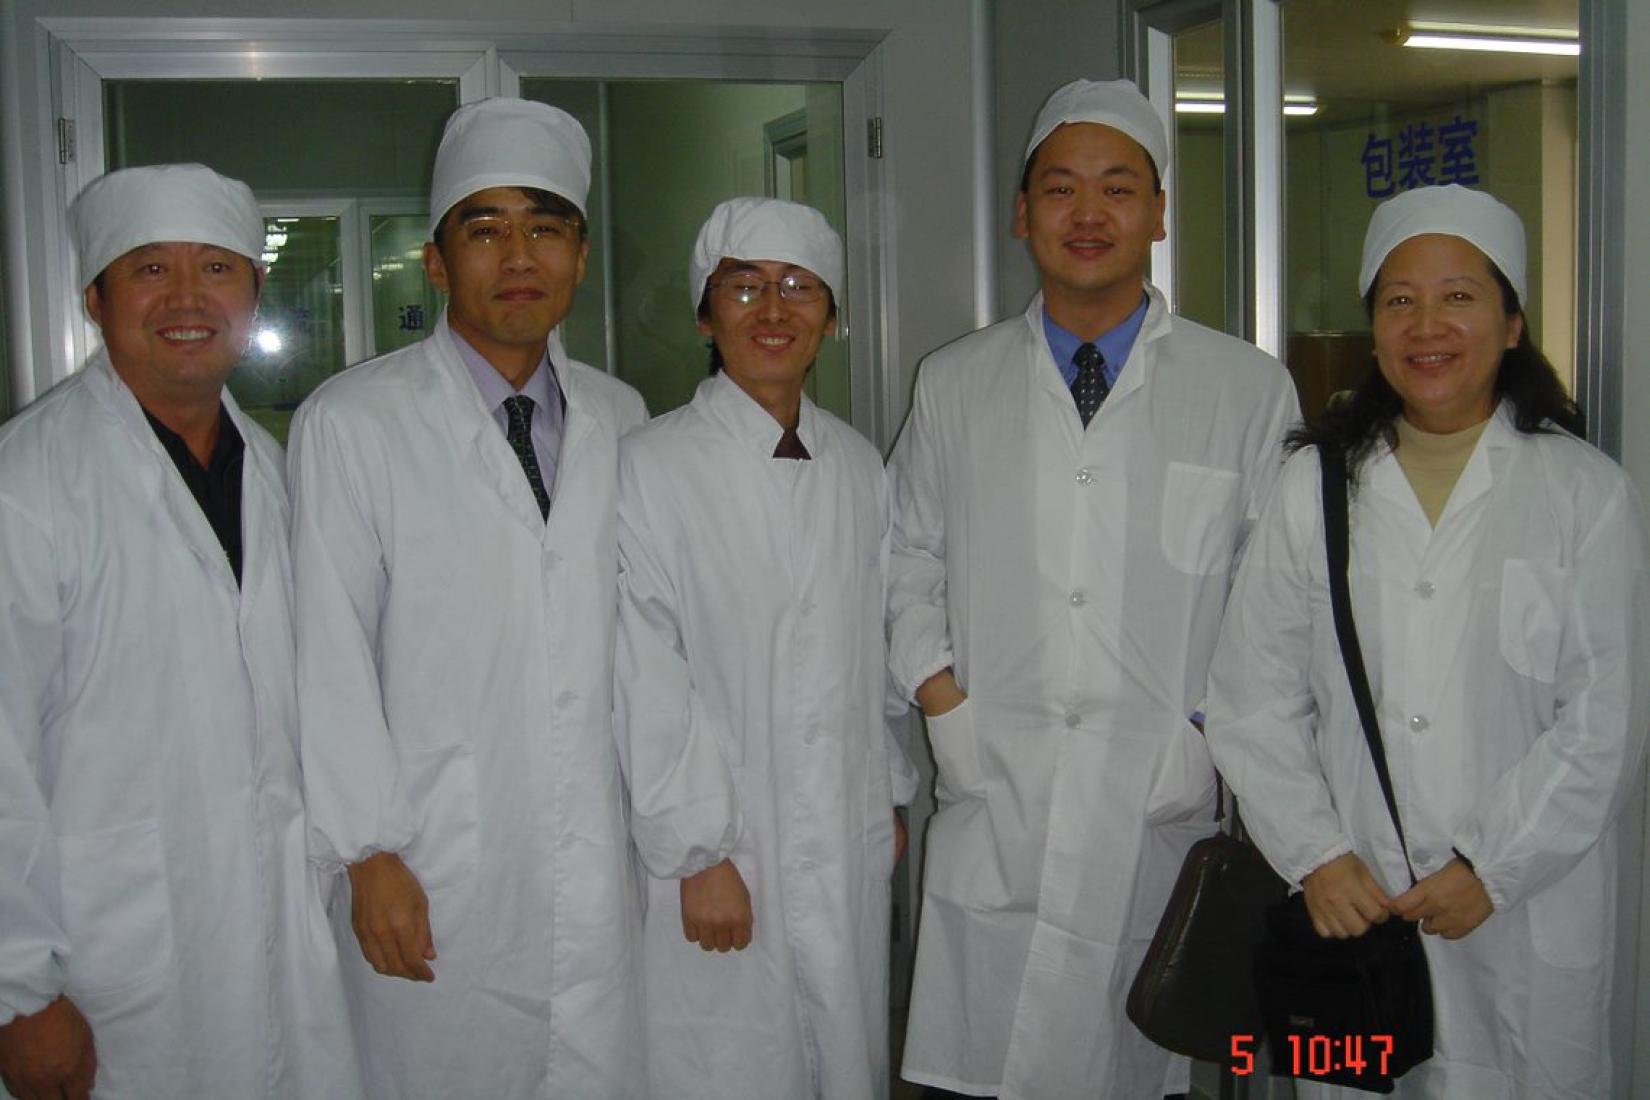 In a food factory with union chair and tripartite delegation, Nanjing, 2004